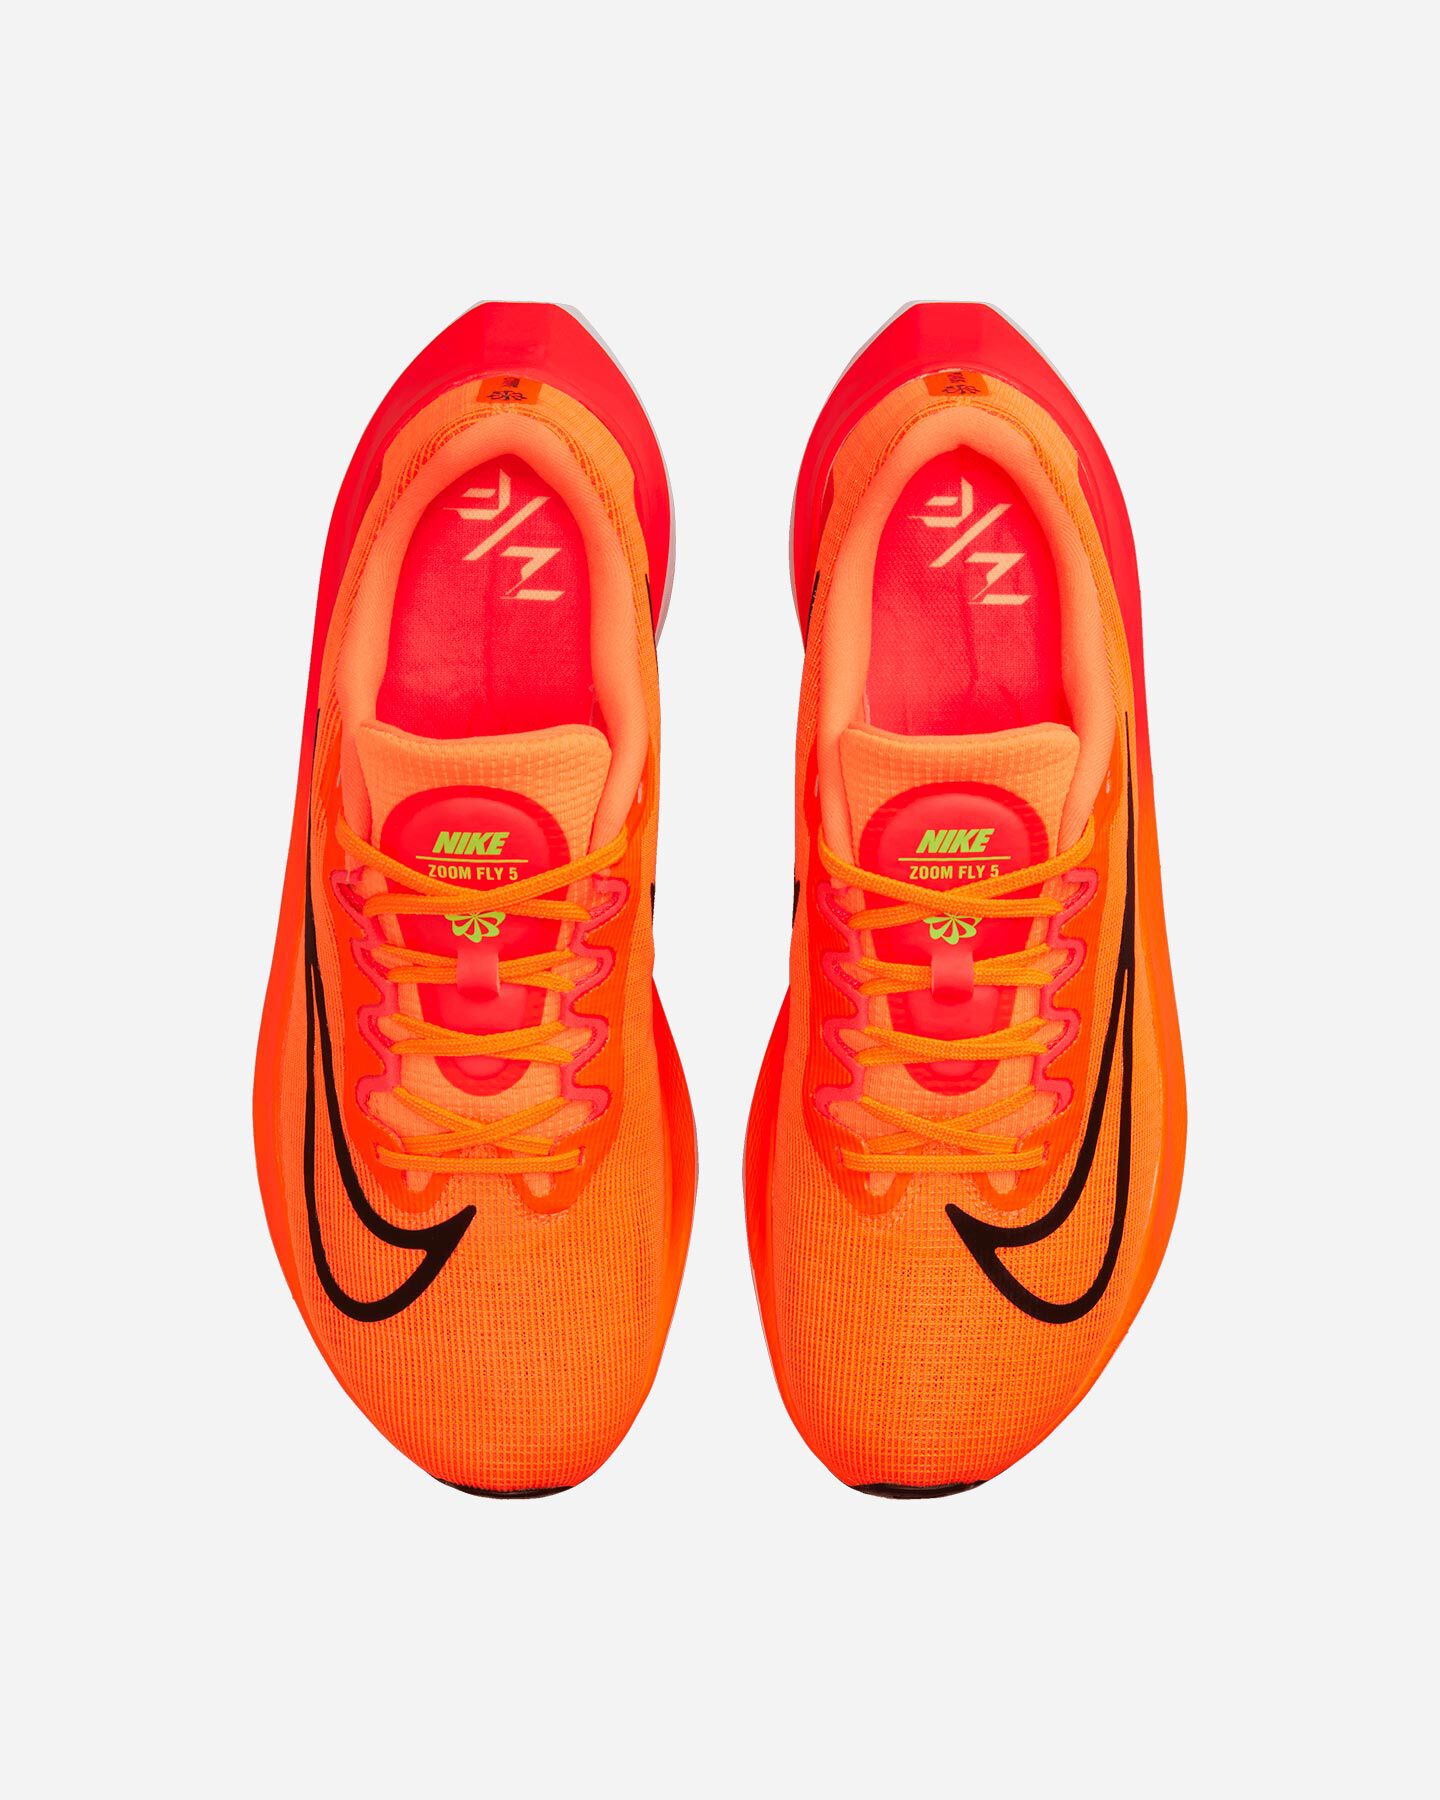  Scarpe running NIKE ZOOM FLY 5 M S5456398 scatto 3